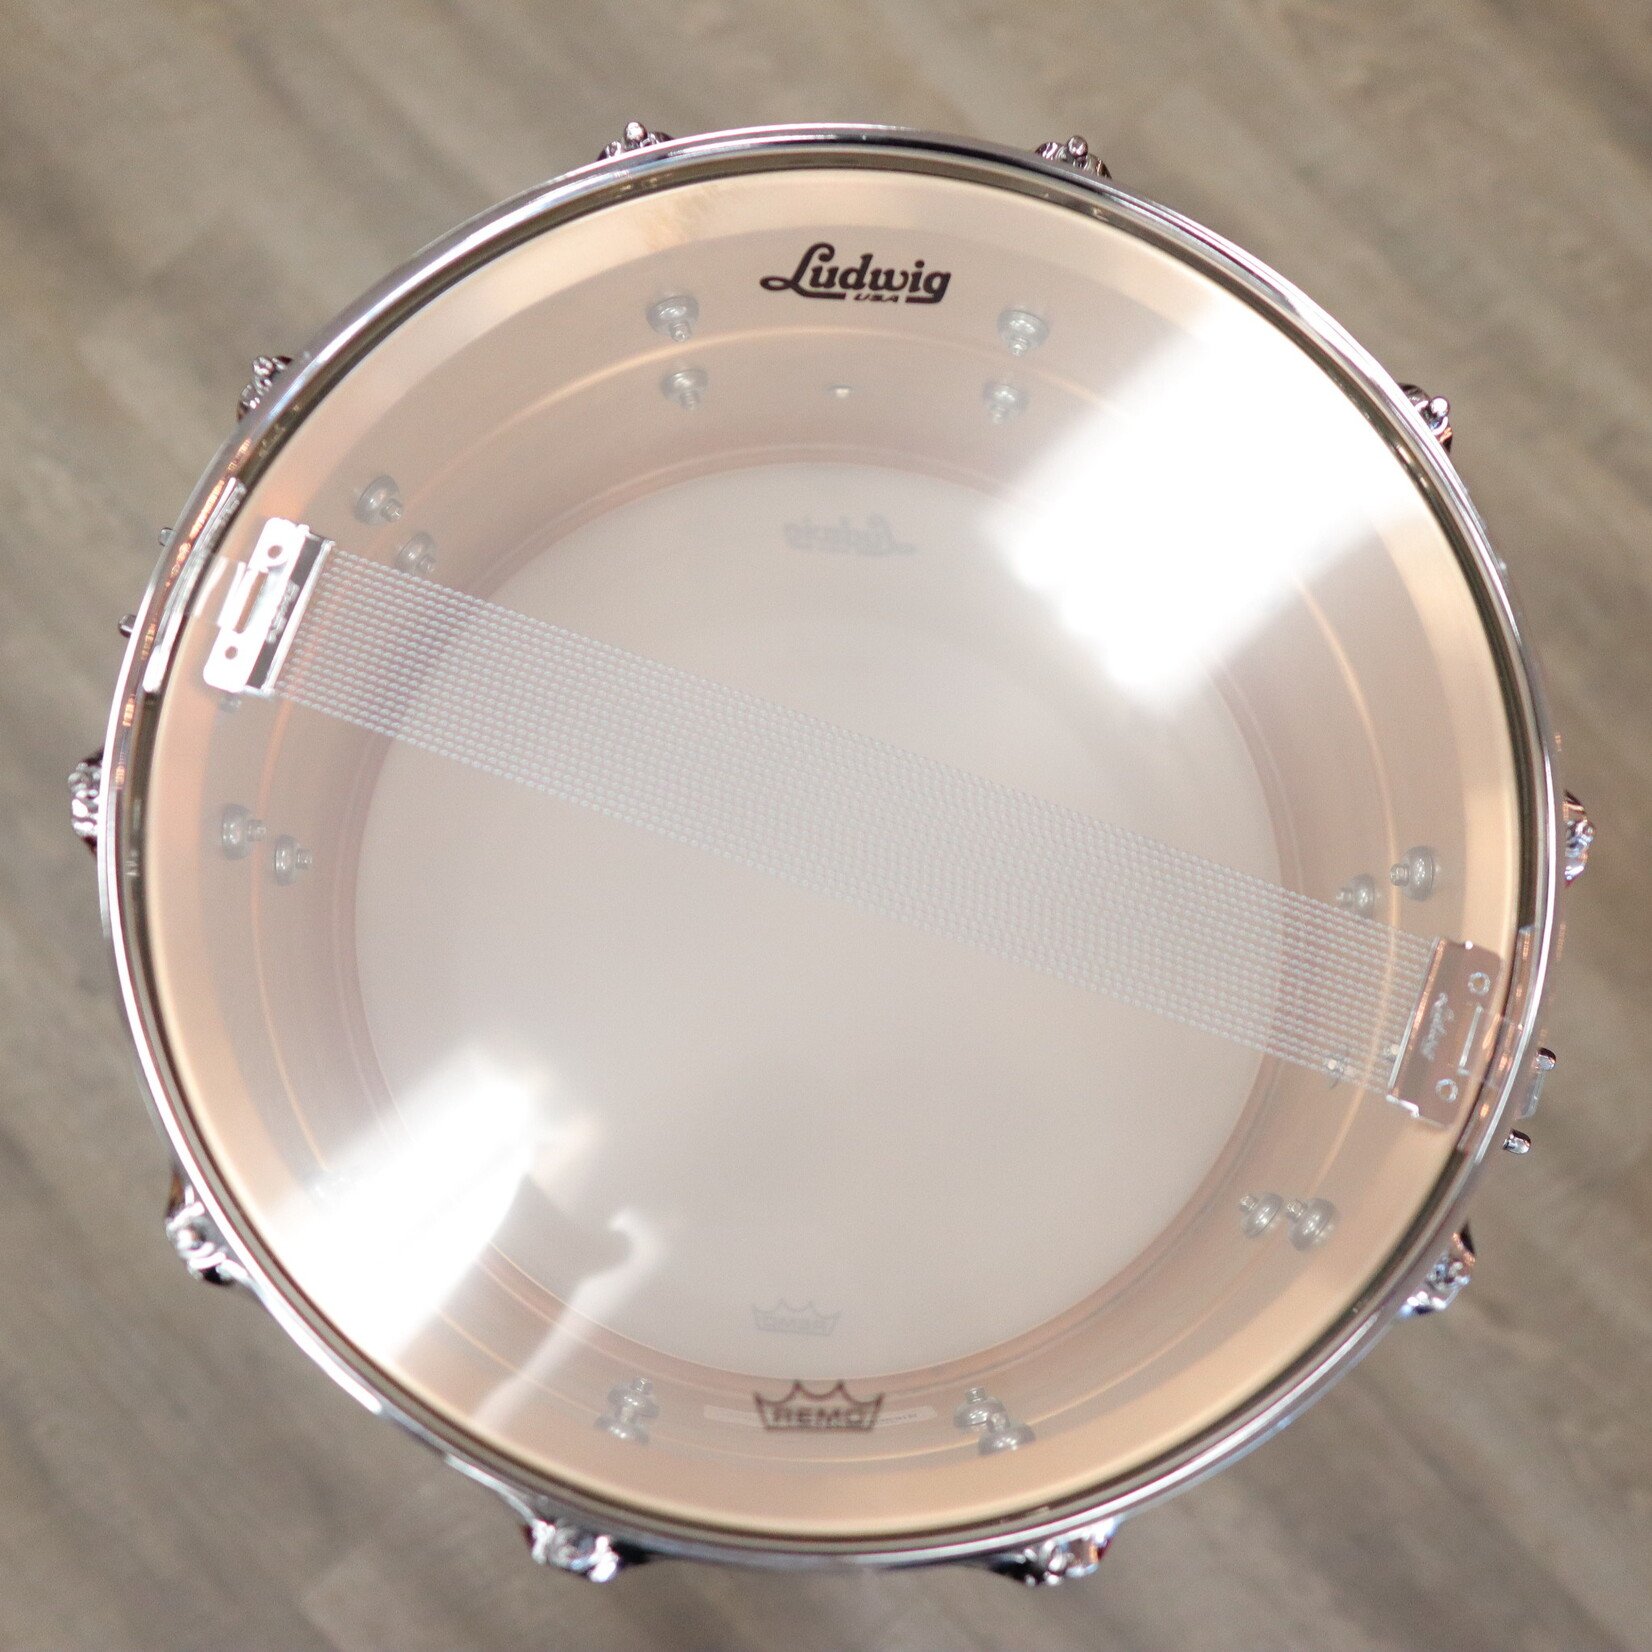 Ludwig Ludwig 8x14" Hammered Bronze Snare Drum LB508K